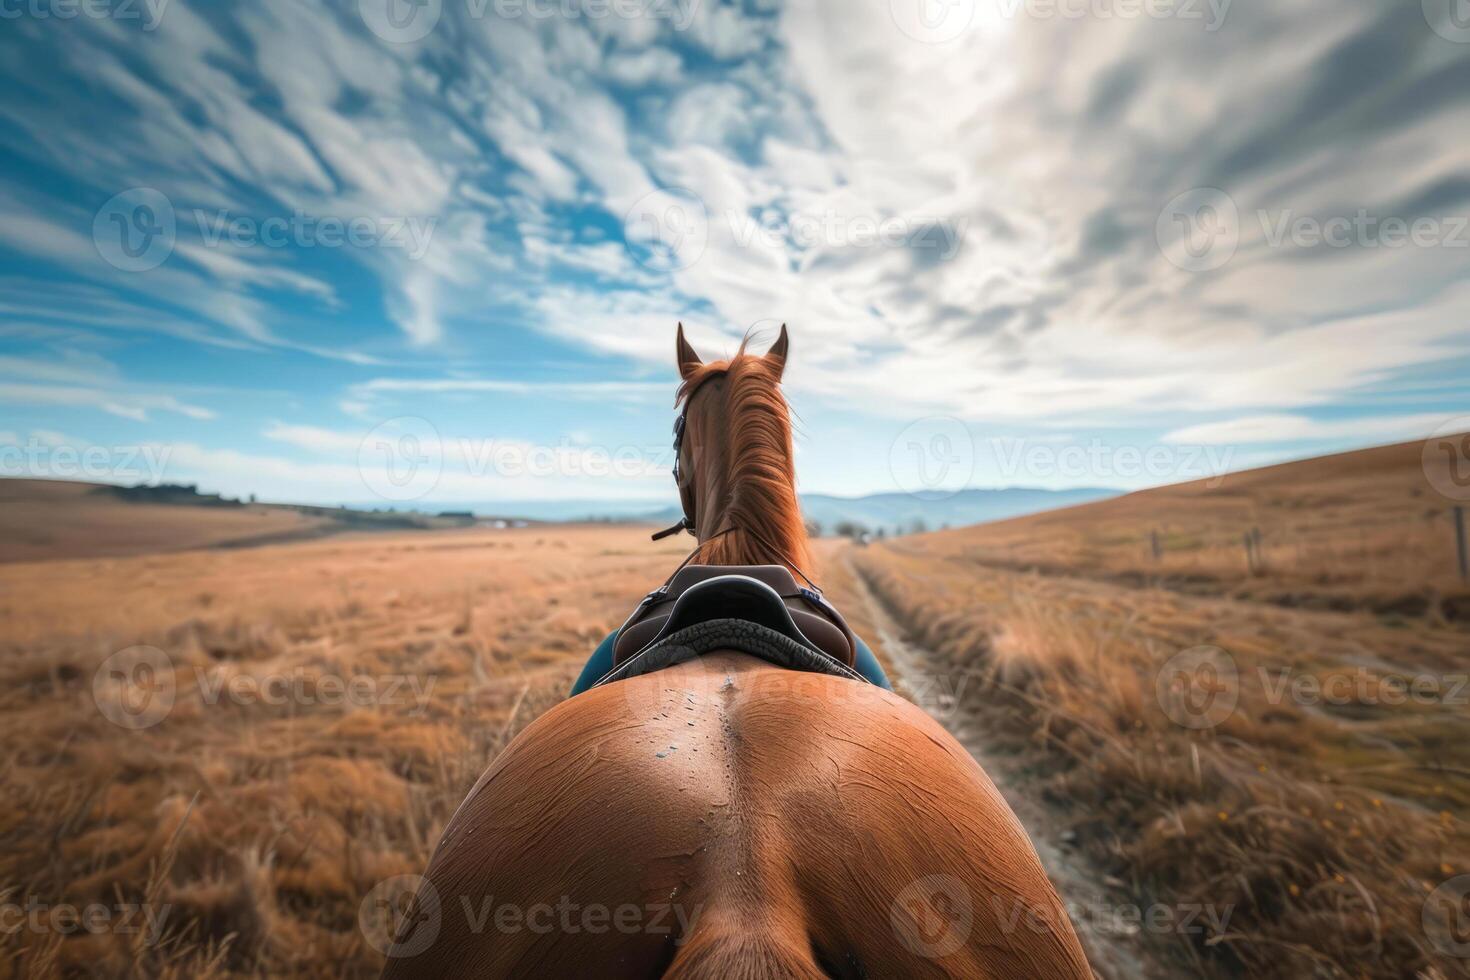 Rear view of horse riding in field photo